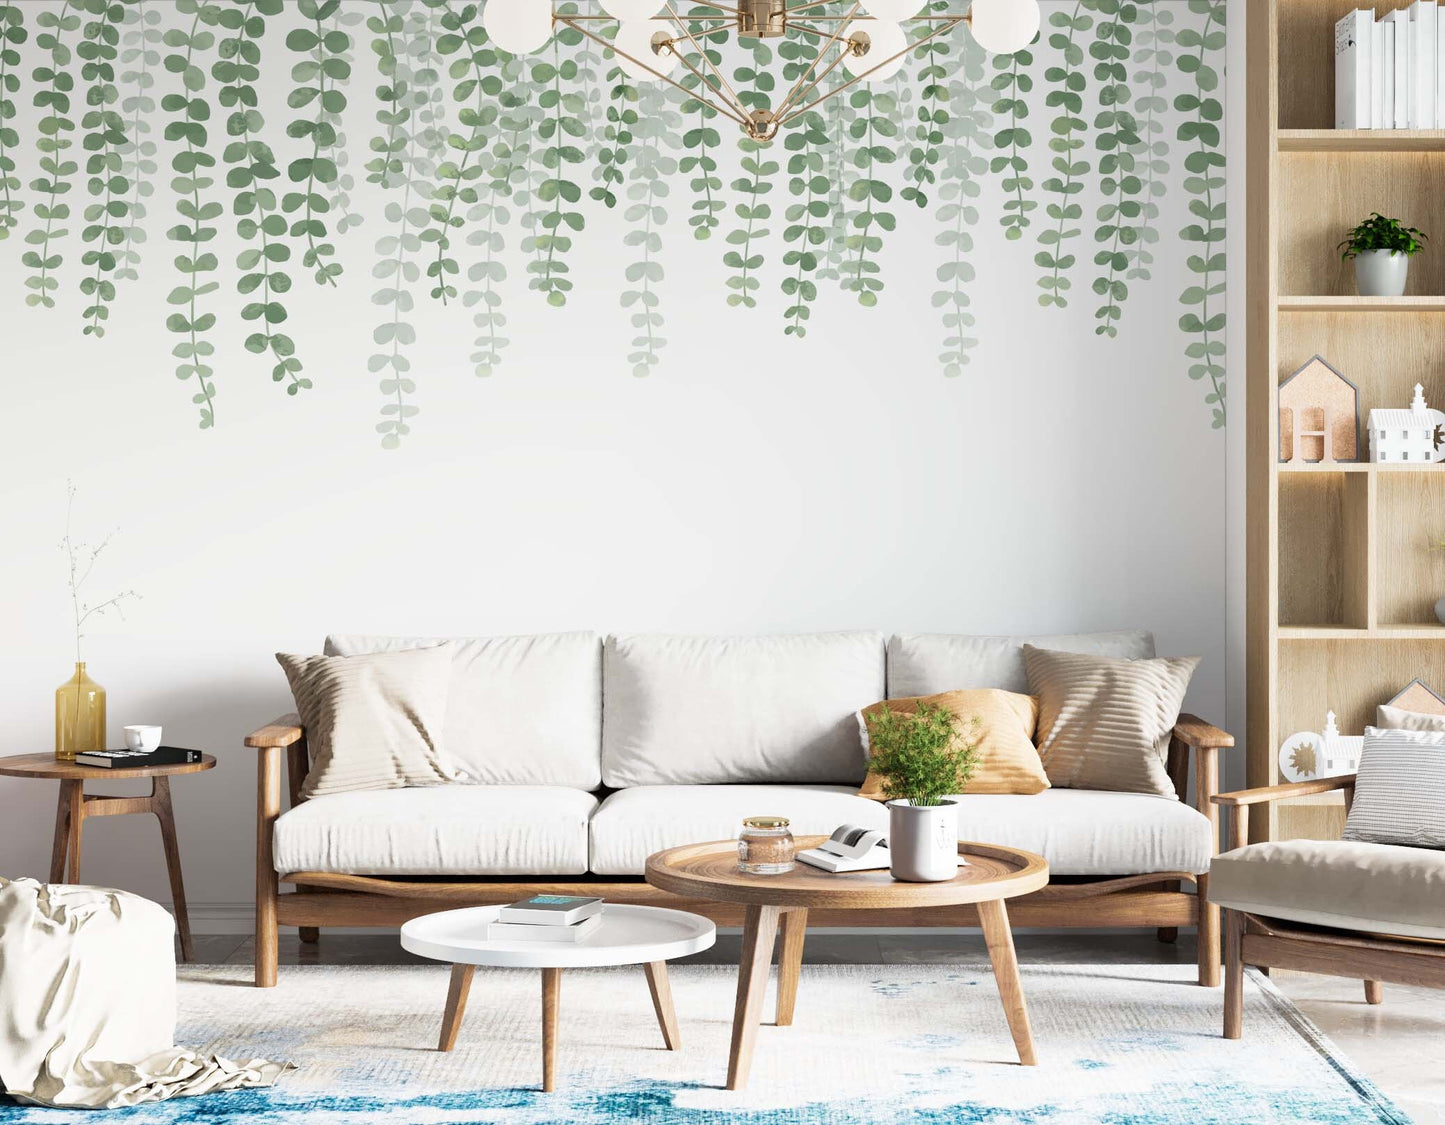 Hanging Eucalyptus Greenery Wall Stickers Vines Leaves Decals, LF310